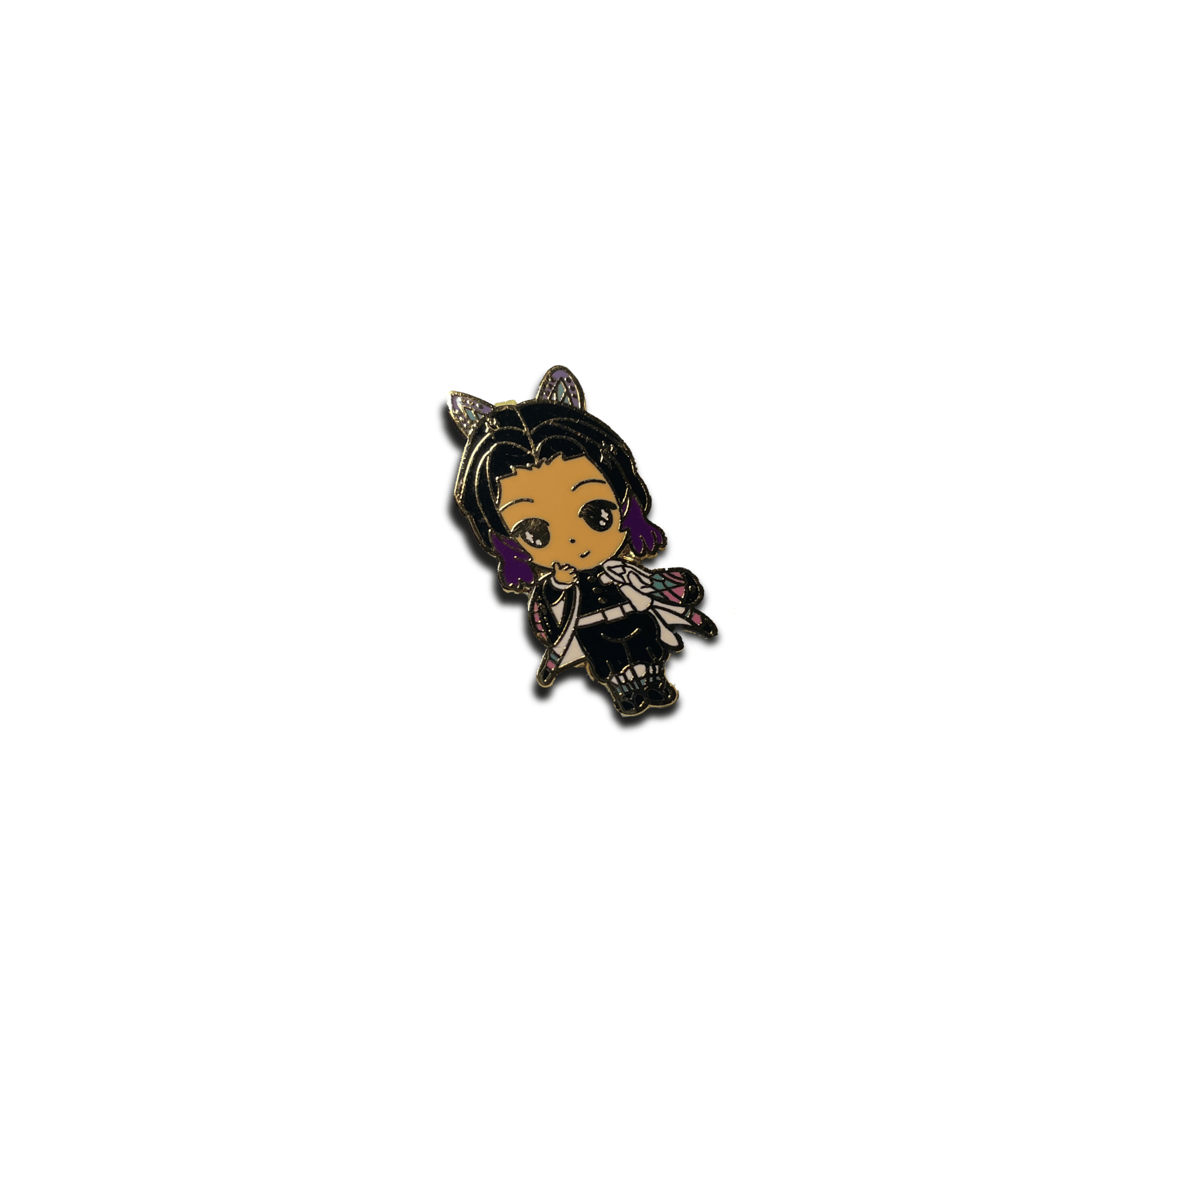 Free Shipping 58mm Anime Pins Second Element Demon Slayer Tinplate Badges  Tanjirou Cosplay Demon Slayer Thing